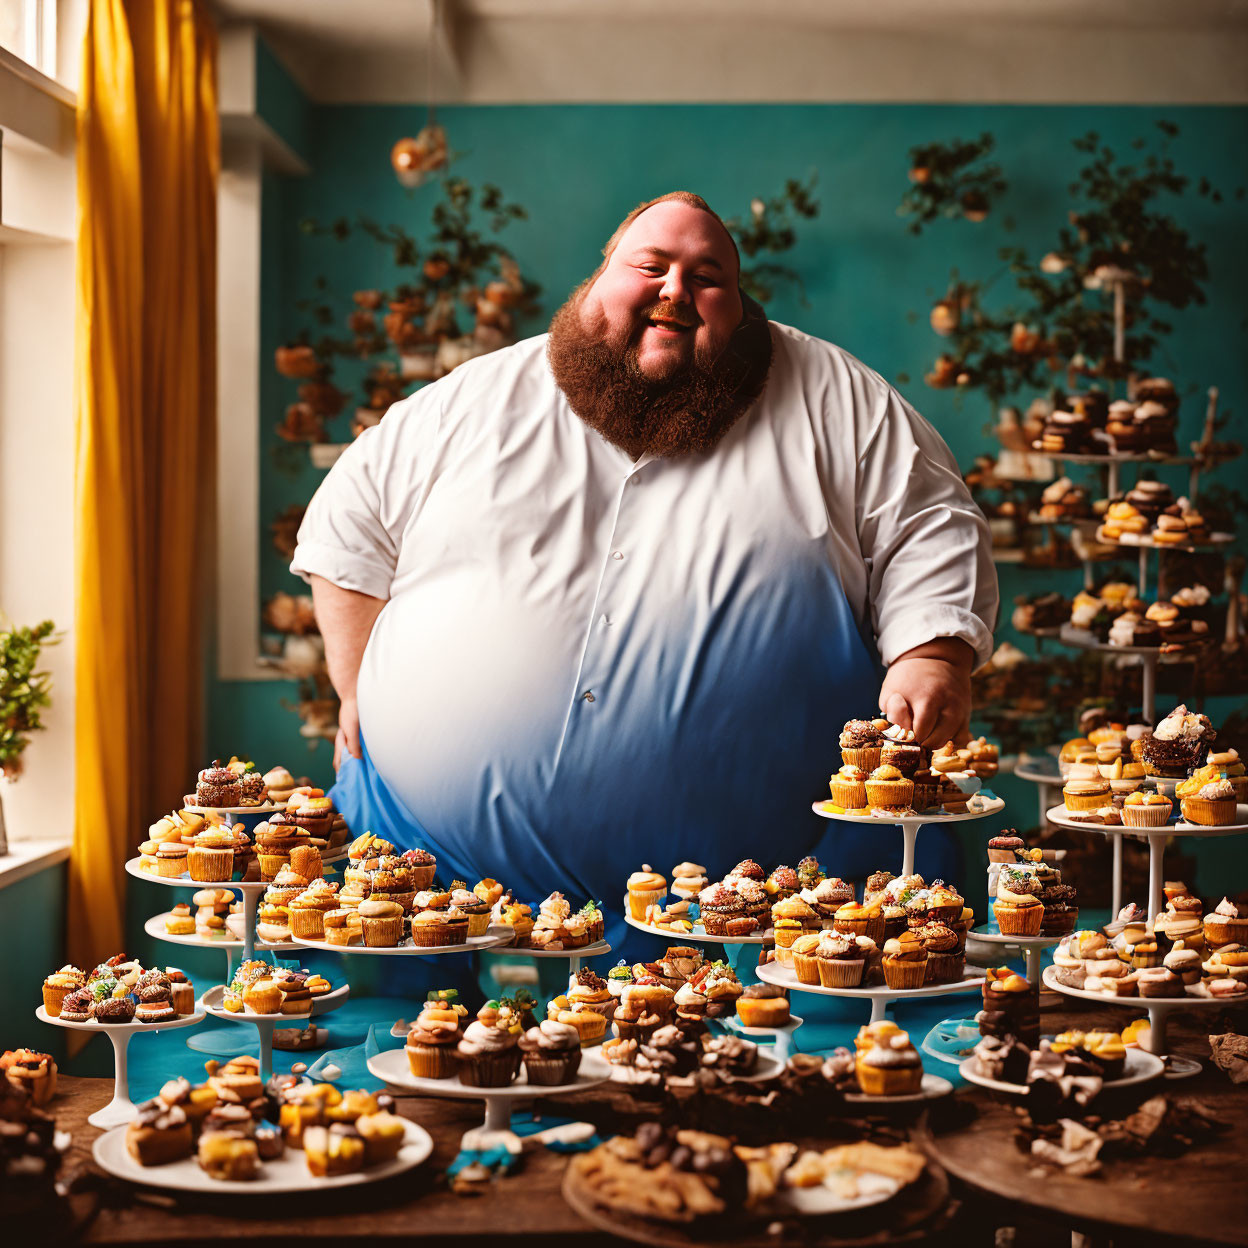 Man surrounded by mini cupcakes on tiered stands in blue room with yellow curtains